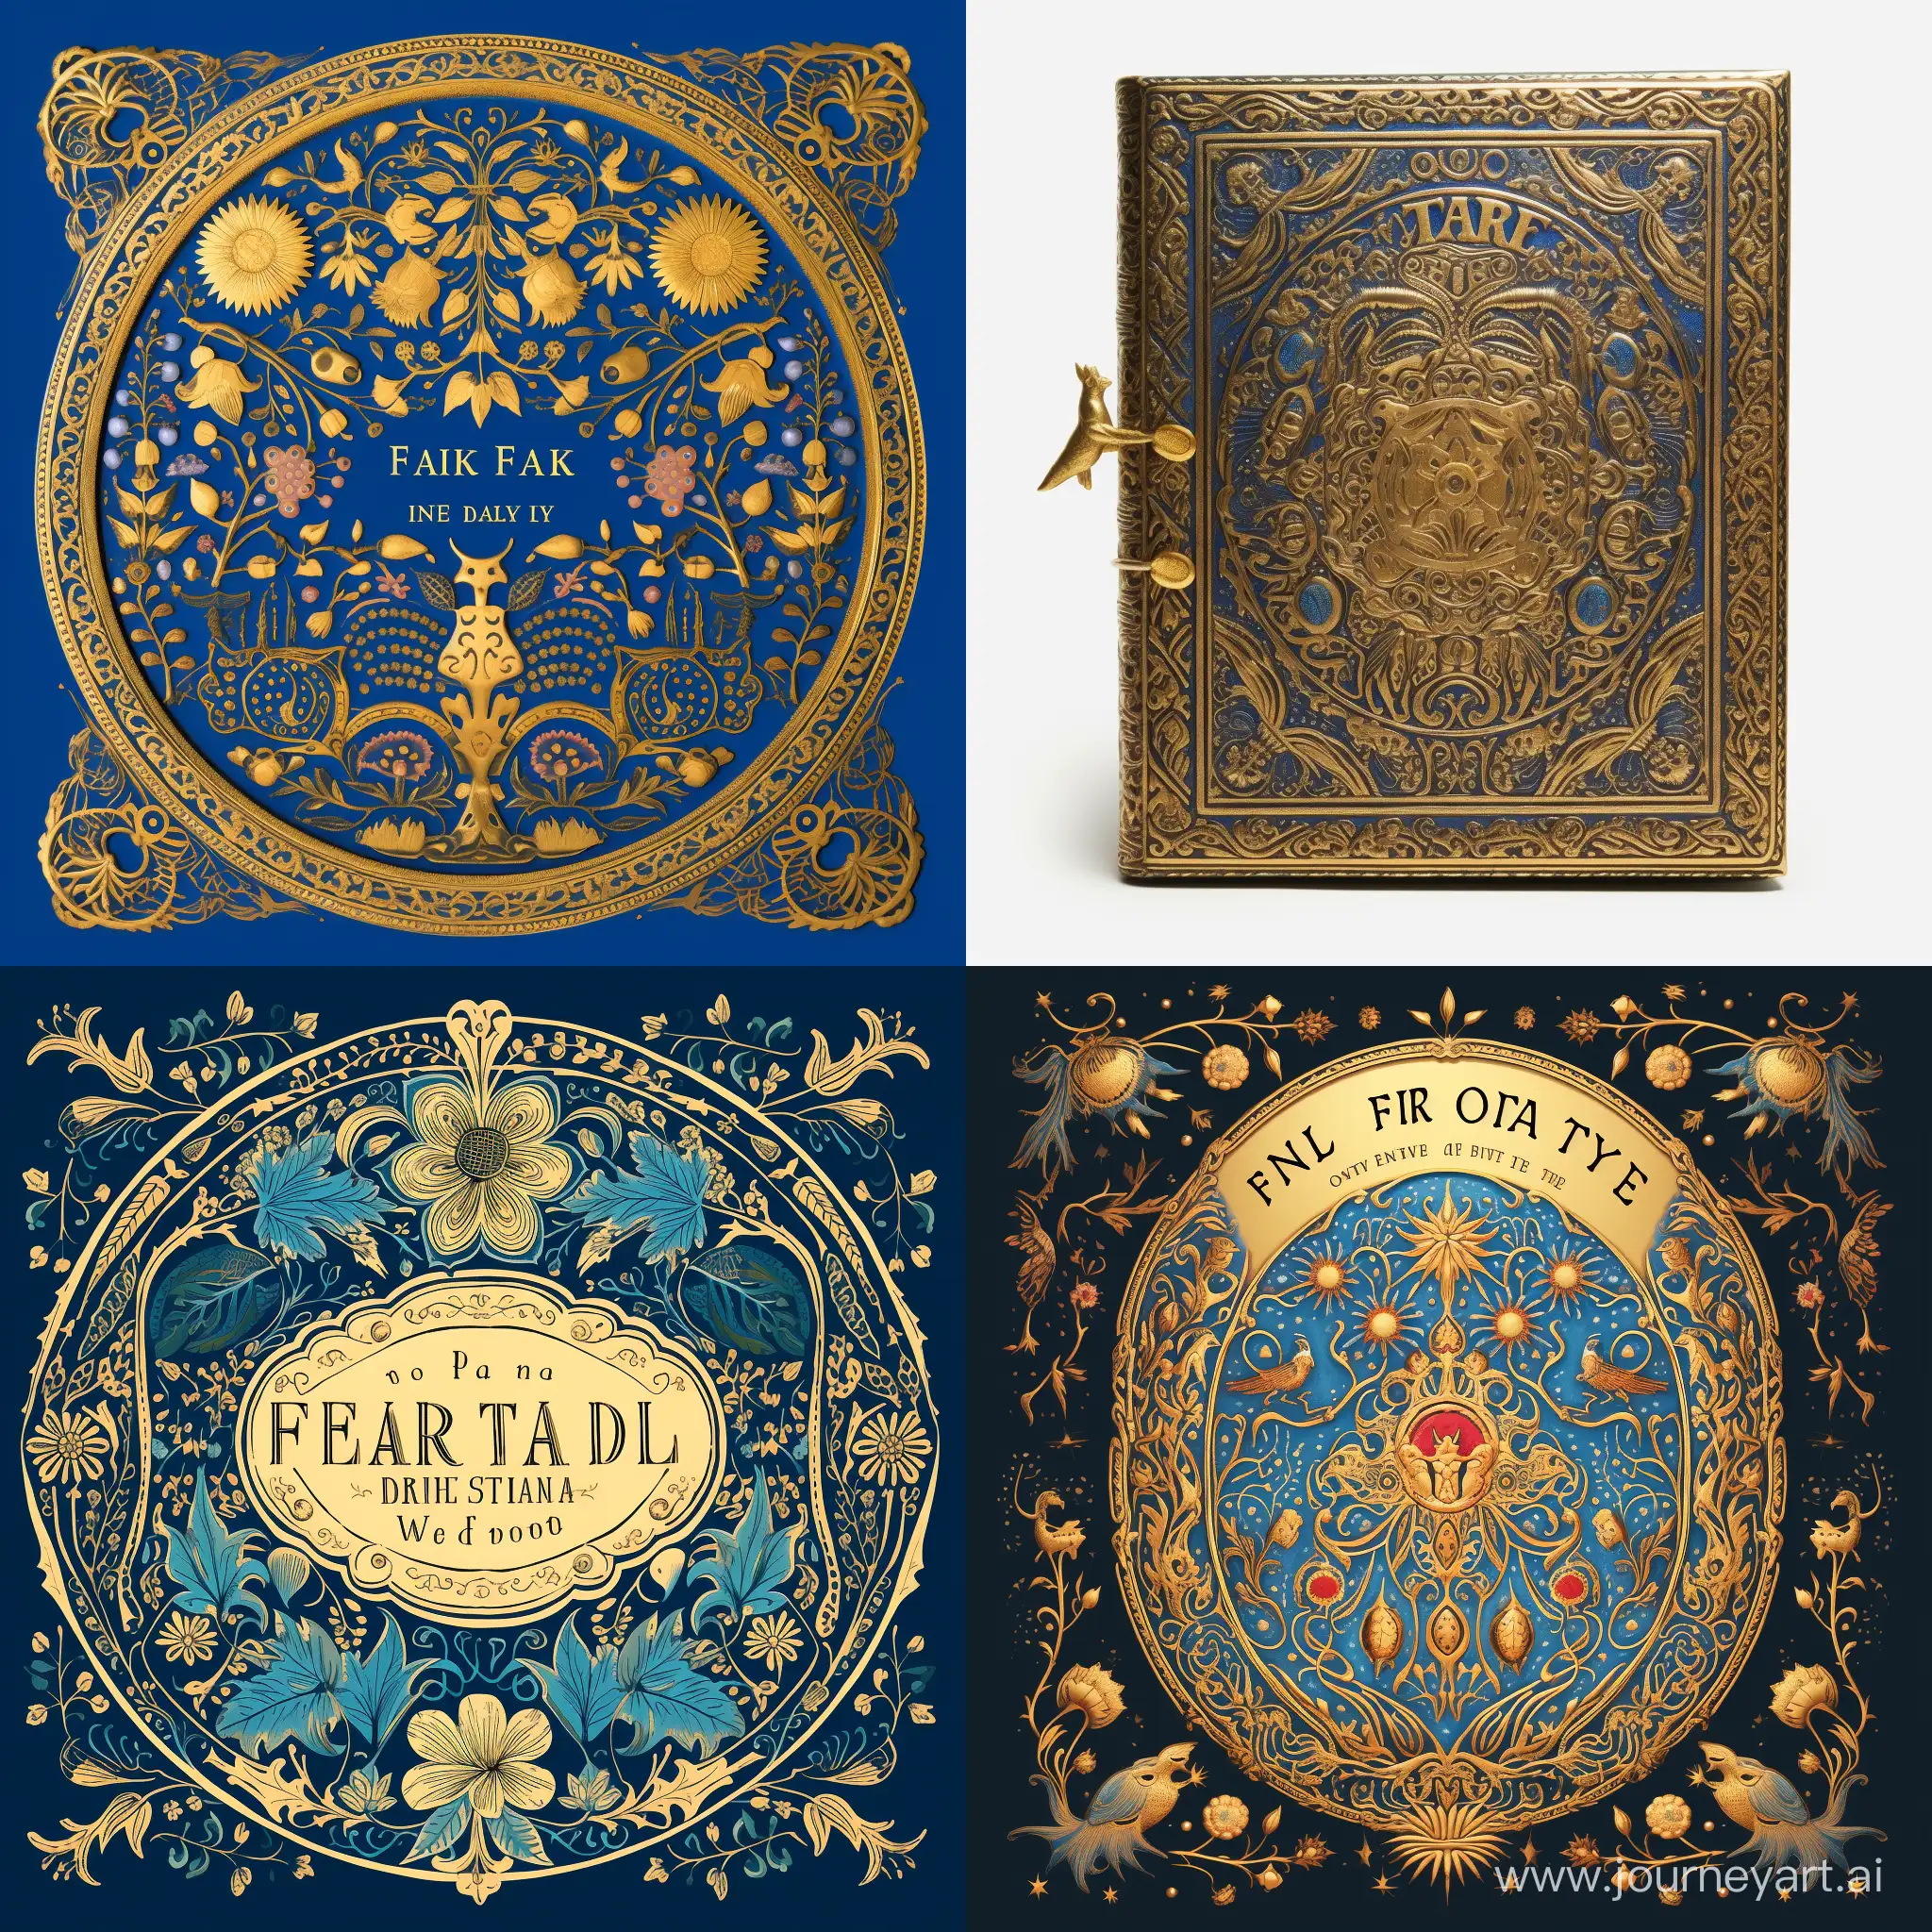 Draw a cover for an old book of fairy tales, with gold embossing, the cover of a book made of bright blue leather is old and worn, there are plant and animal motifs, detailed patterns of the moon, sun, northern lights, stars, trees, in the middle the inscription "Fairy Tale" in gold letters, a high level of detail